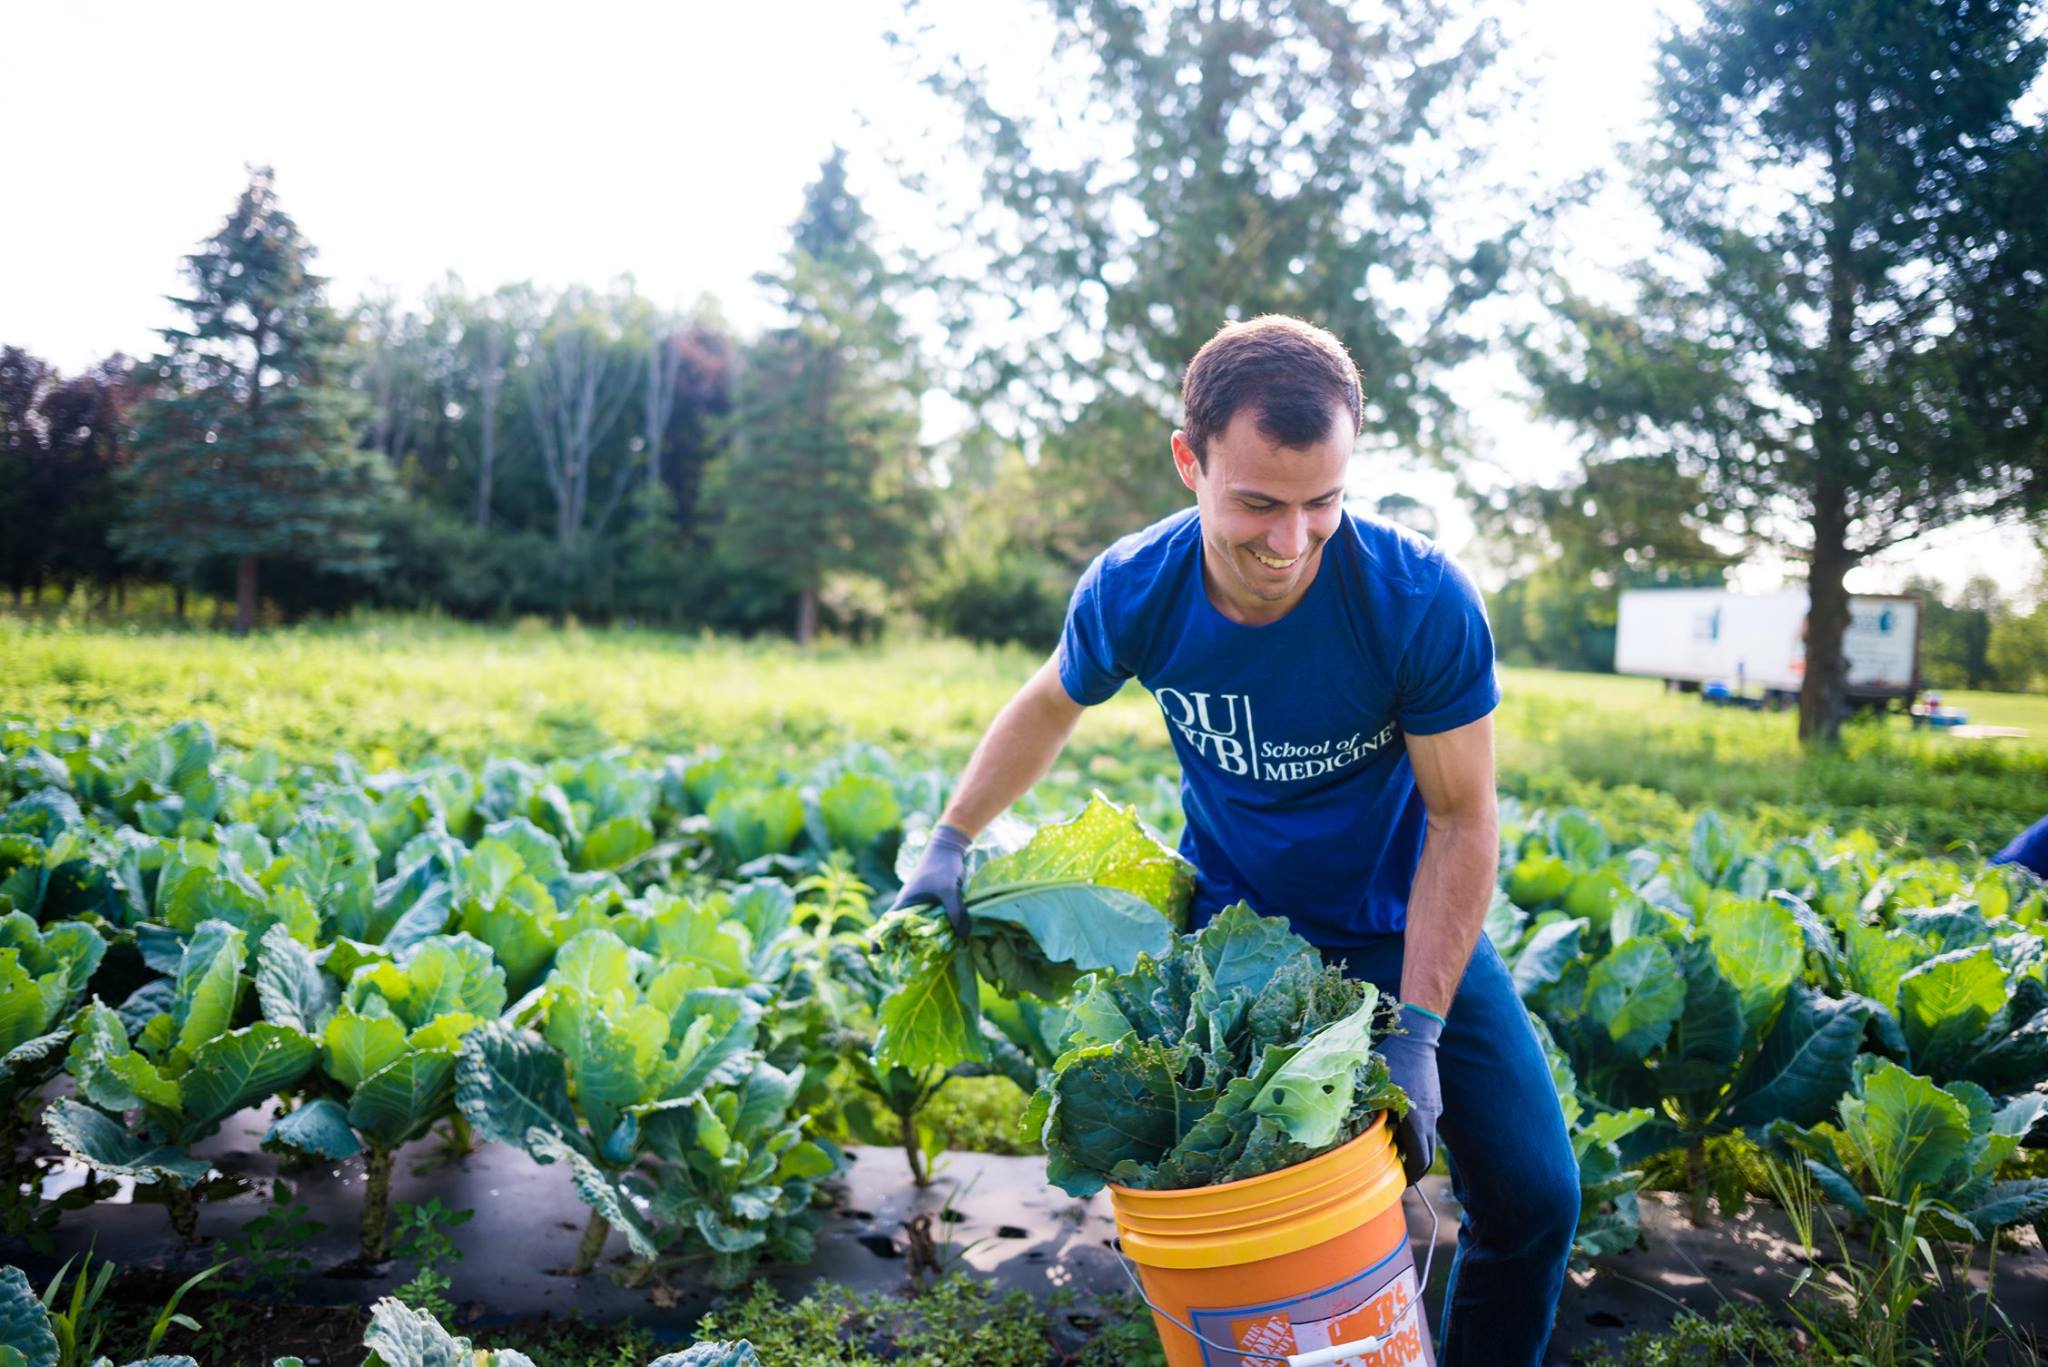 An OUWB student volunteering at Forgotten Harvest farms. He carries a bucket of greens through a field.